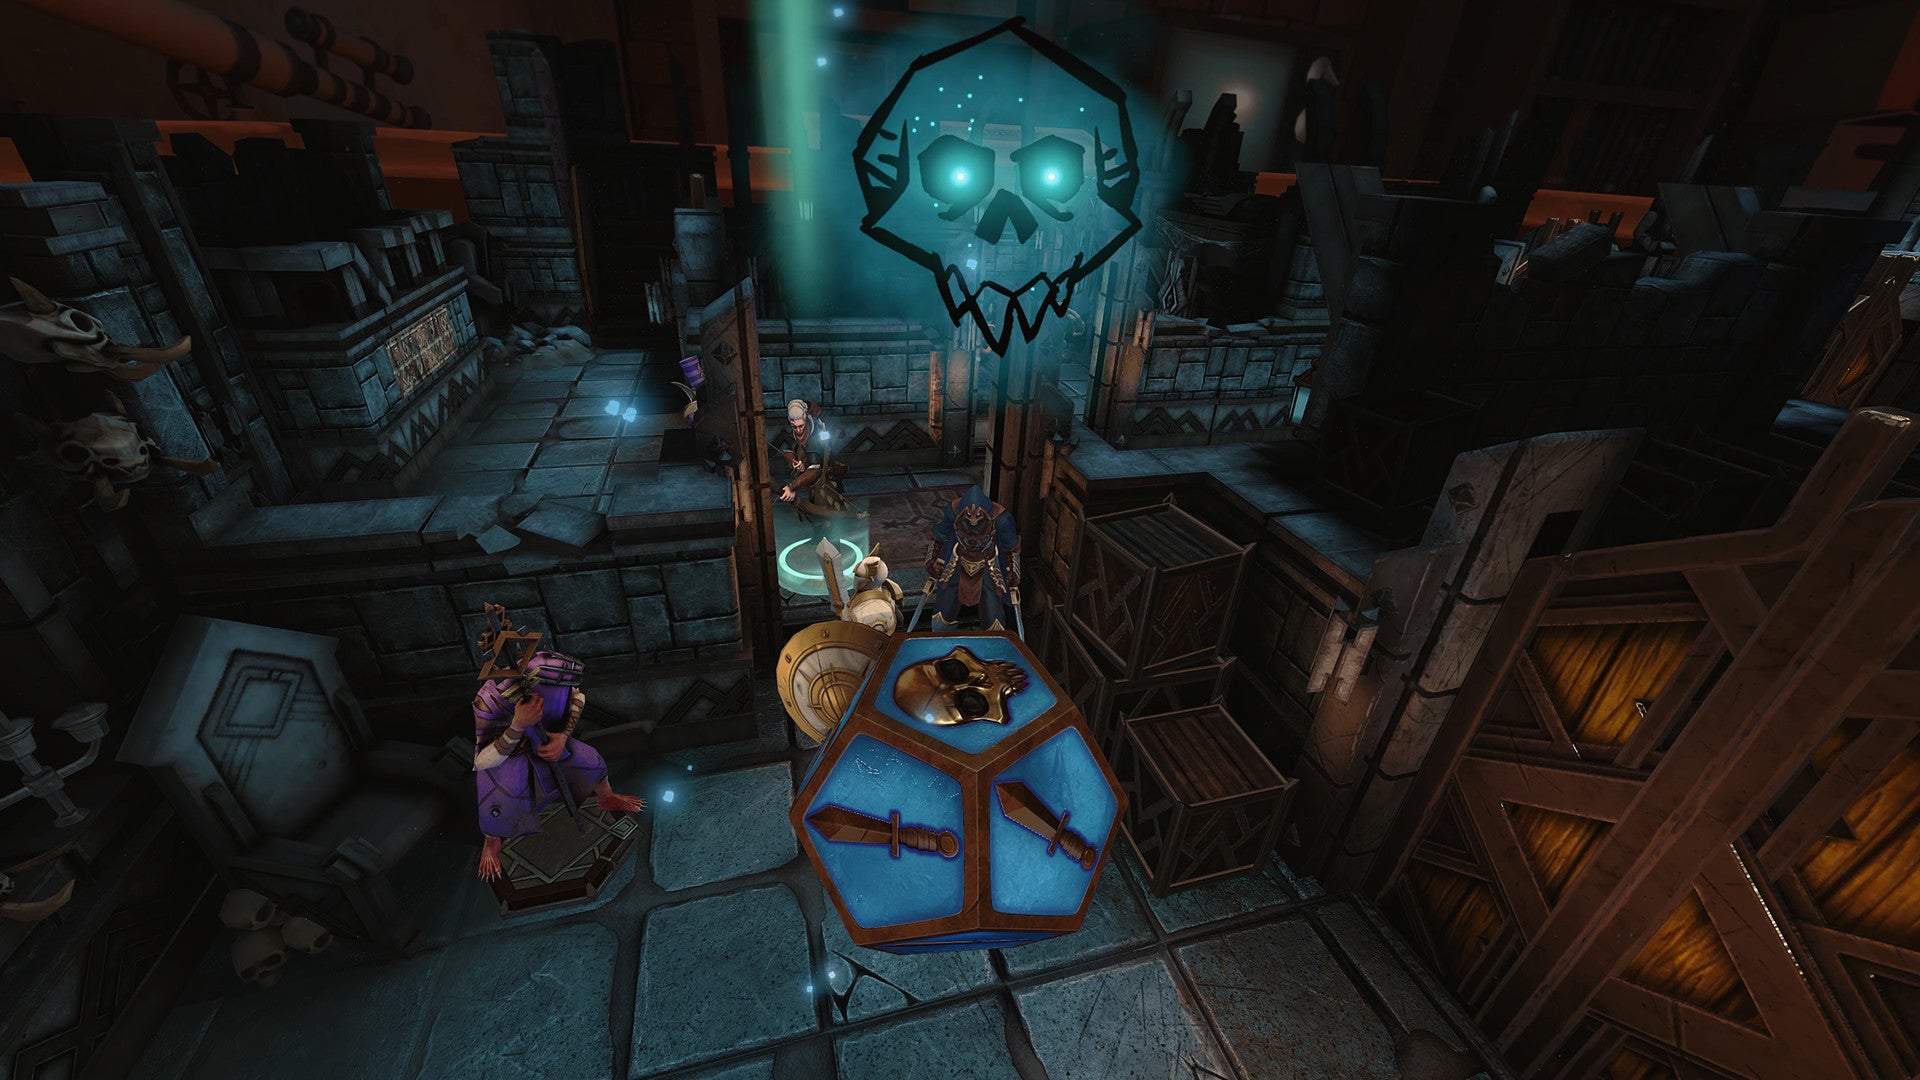 The dice in Demeo, a 3D VR tabletop RPG/strategy game, has rolled a skull symbol, which would seem to be a bad sign